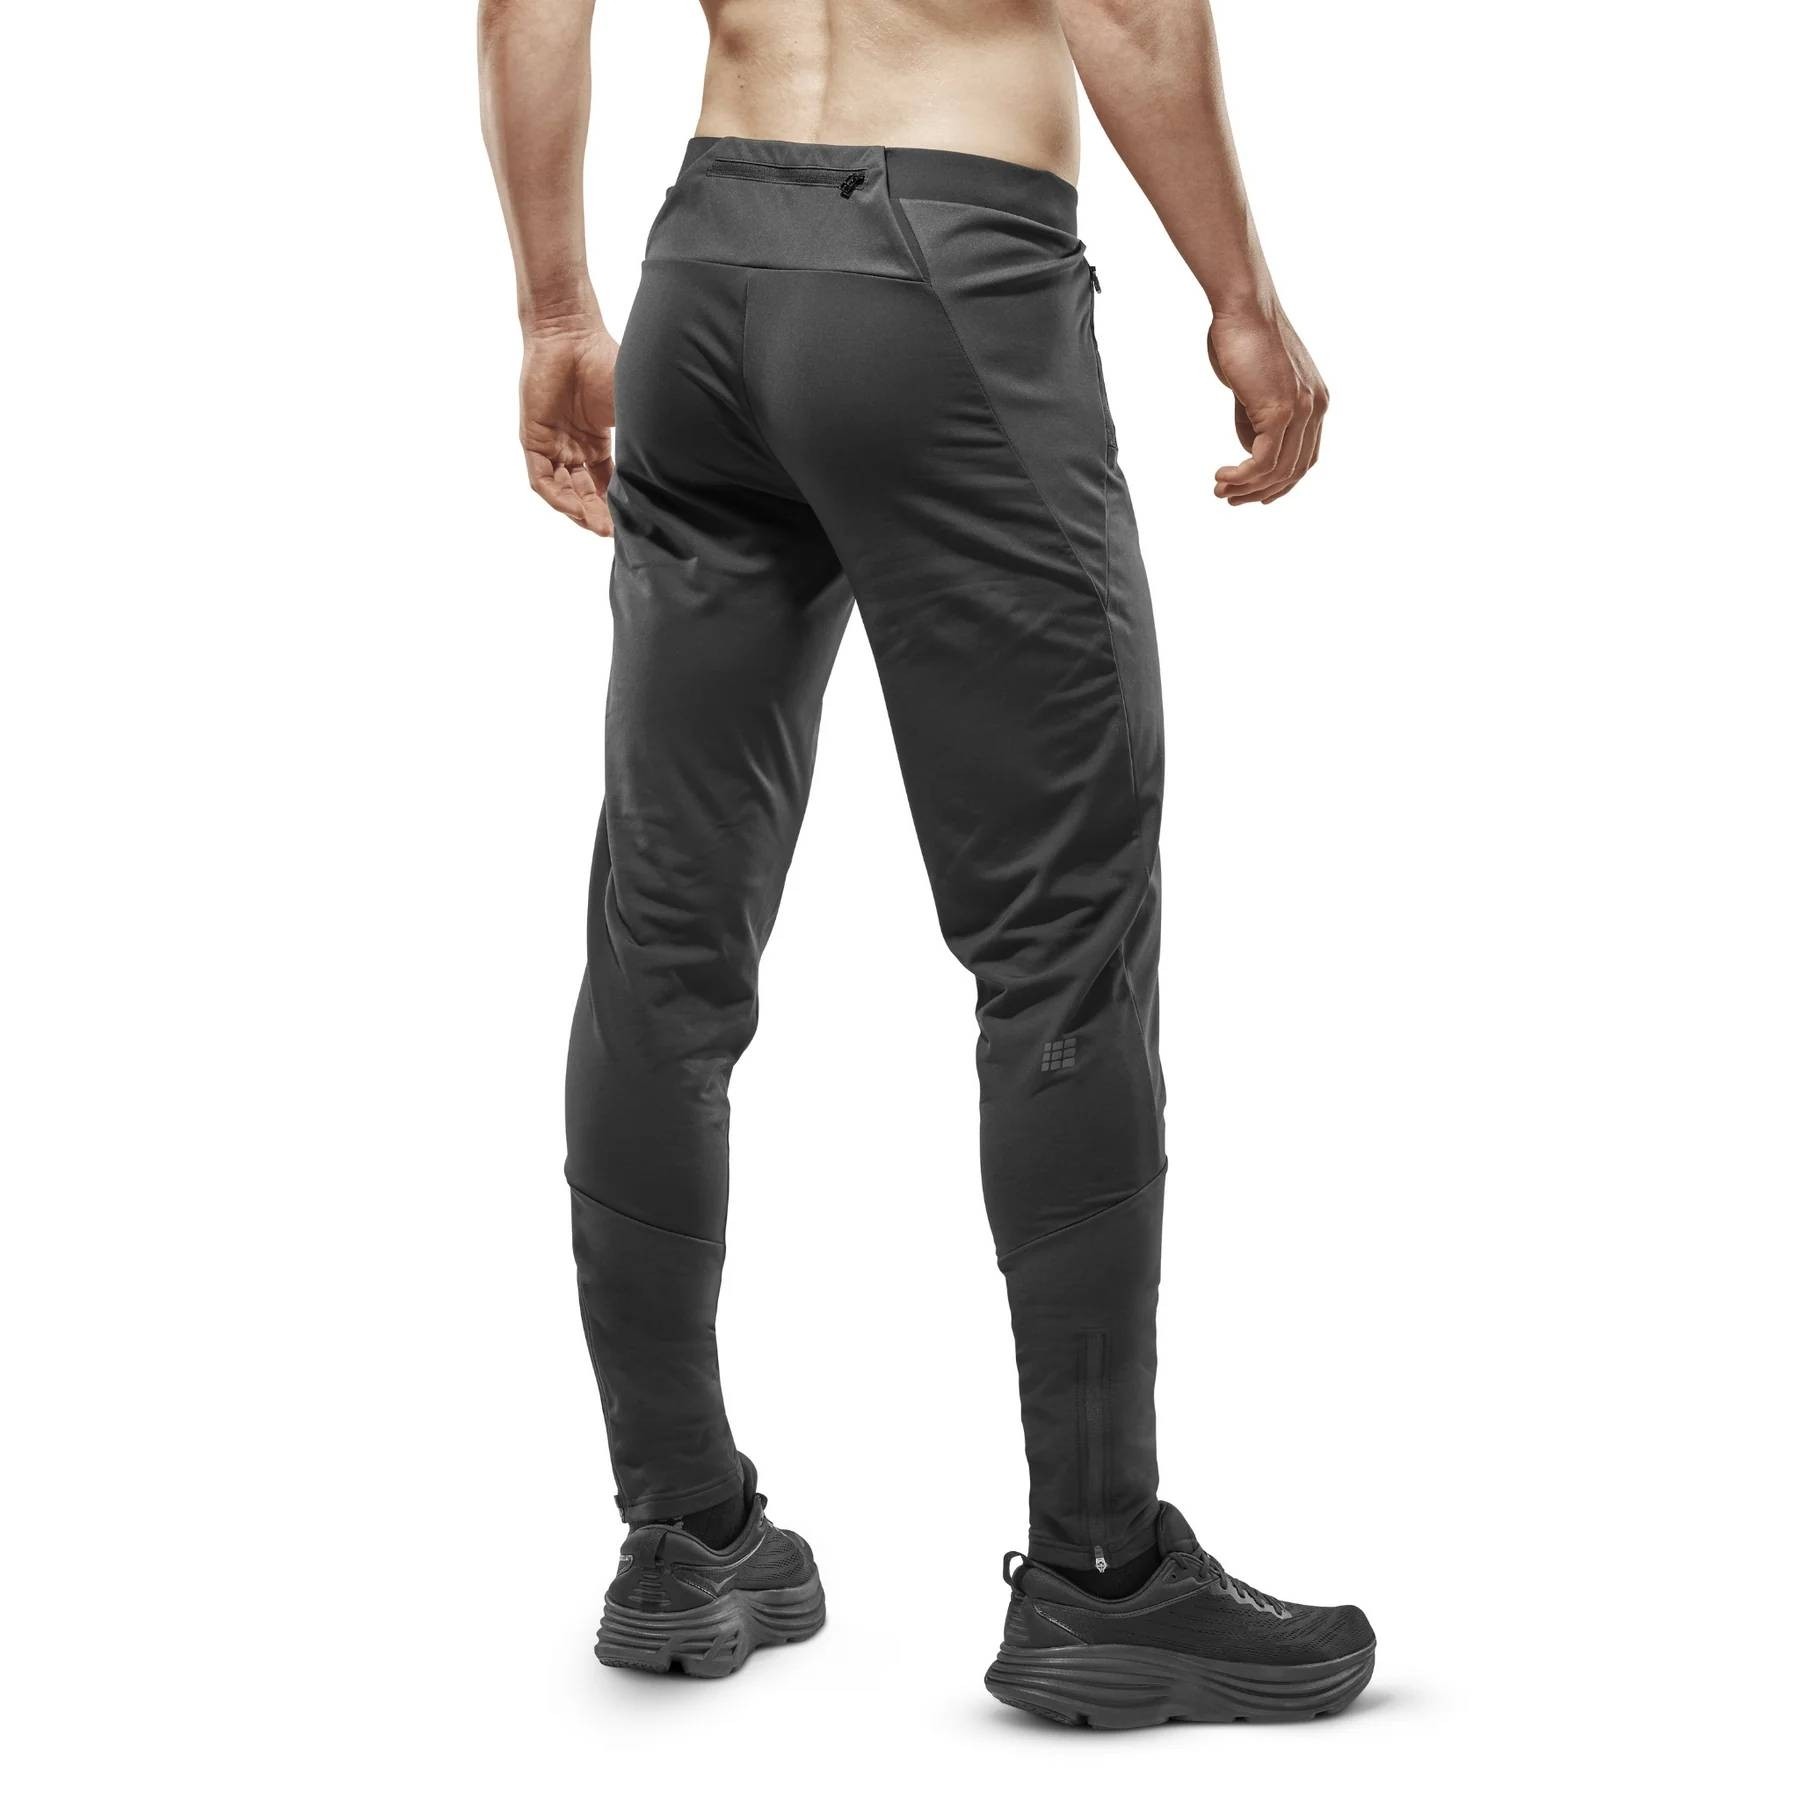 Cold Weather Pants for Men  CEP Athletic Compression Sportswear